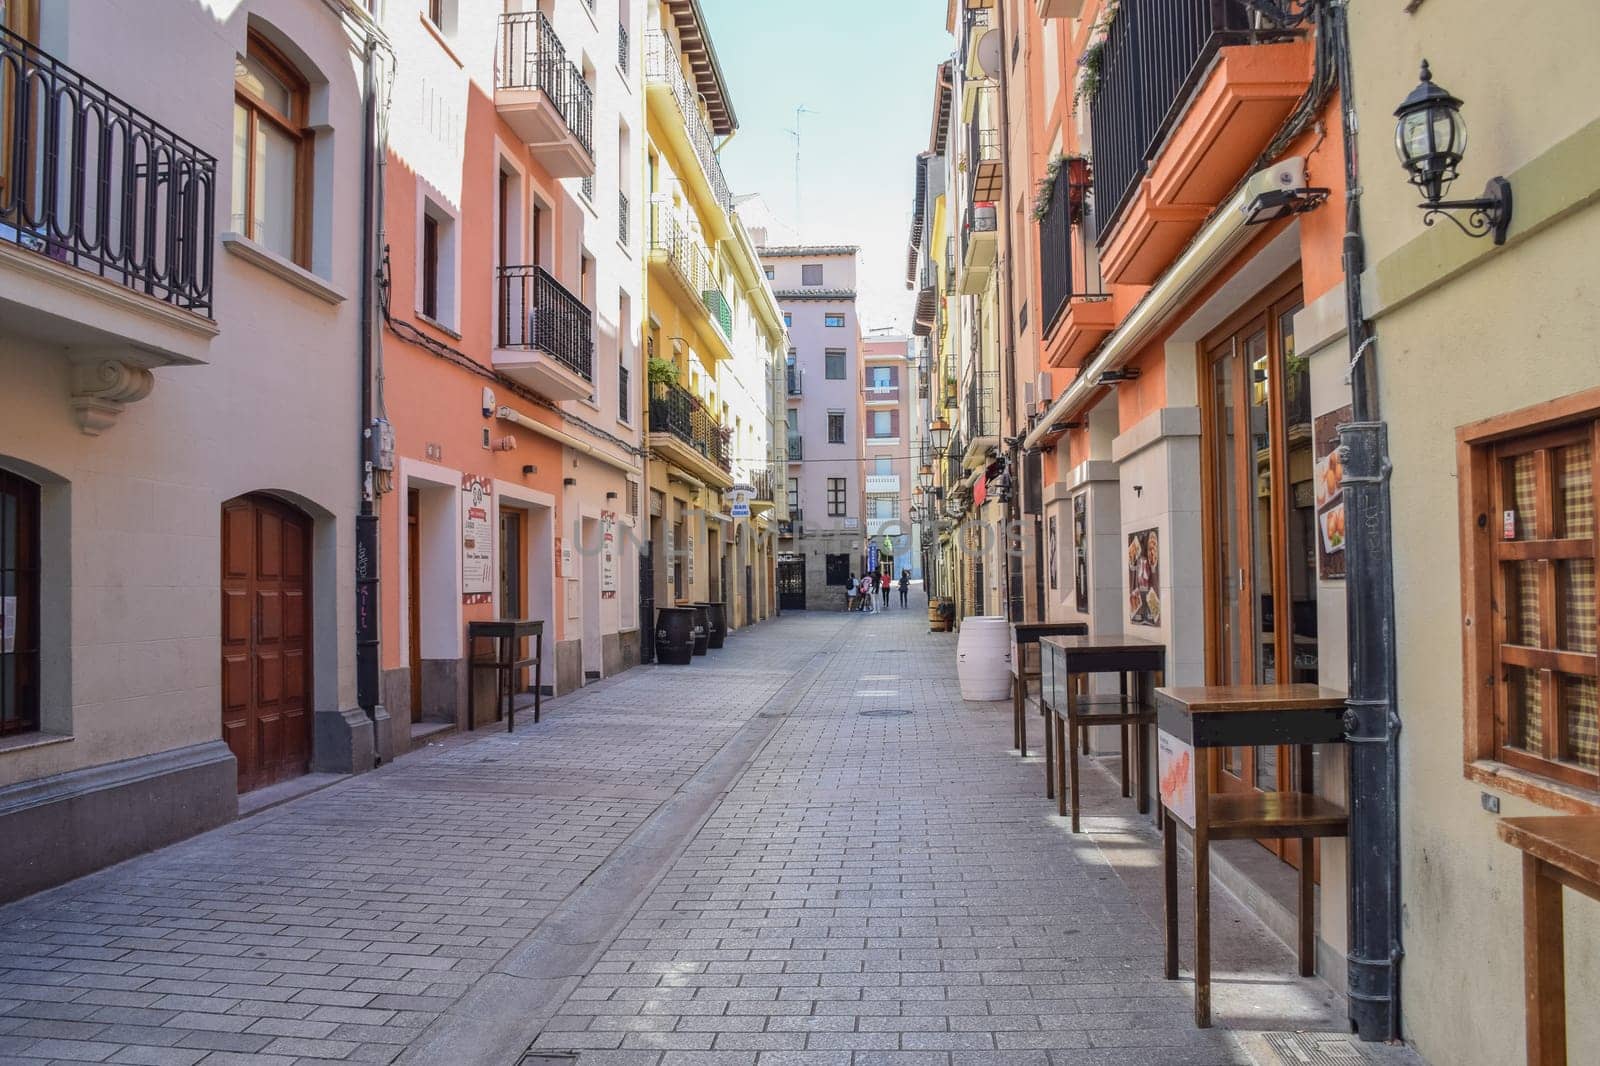 A street in Spain with cafes and restaurants, outdoor bar tables and counters